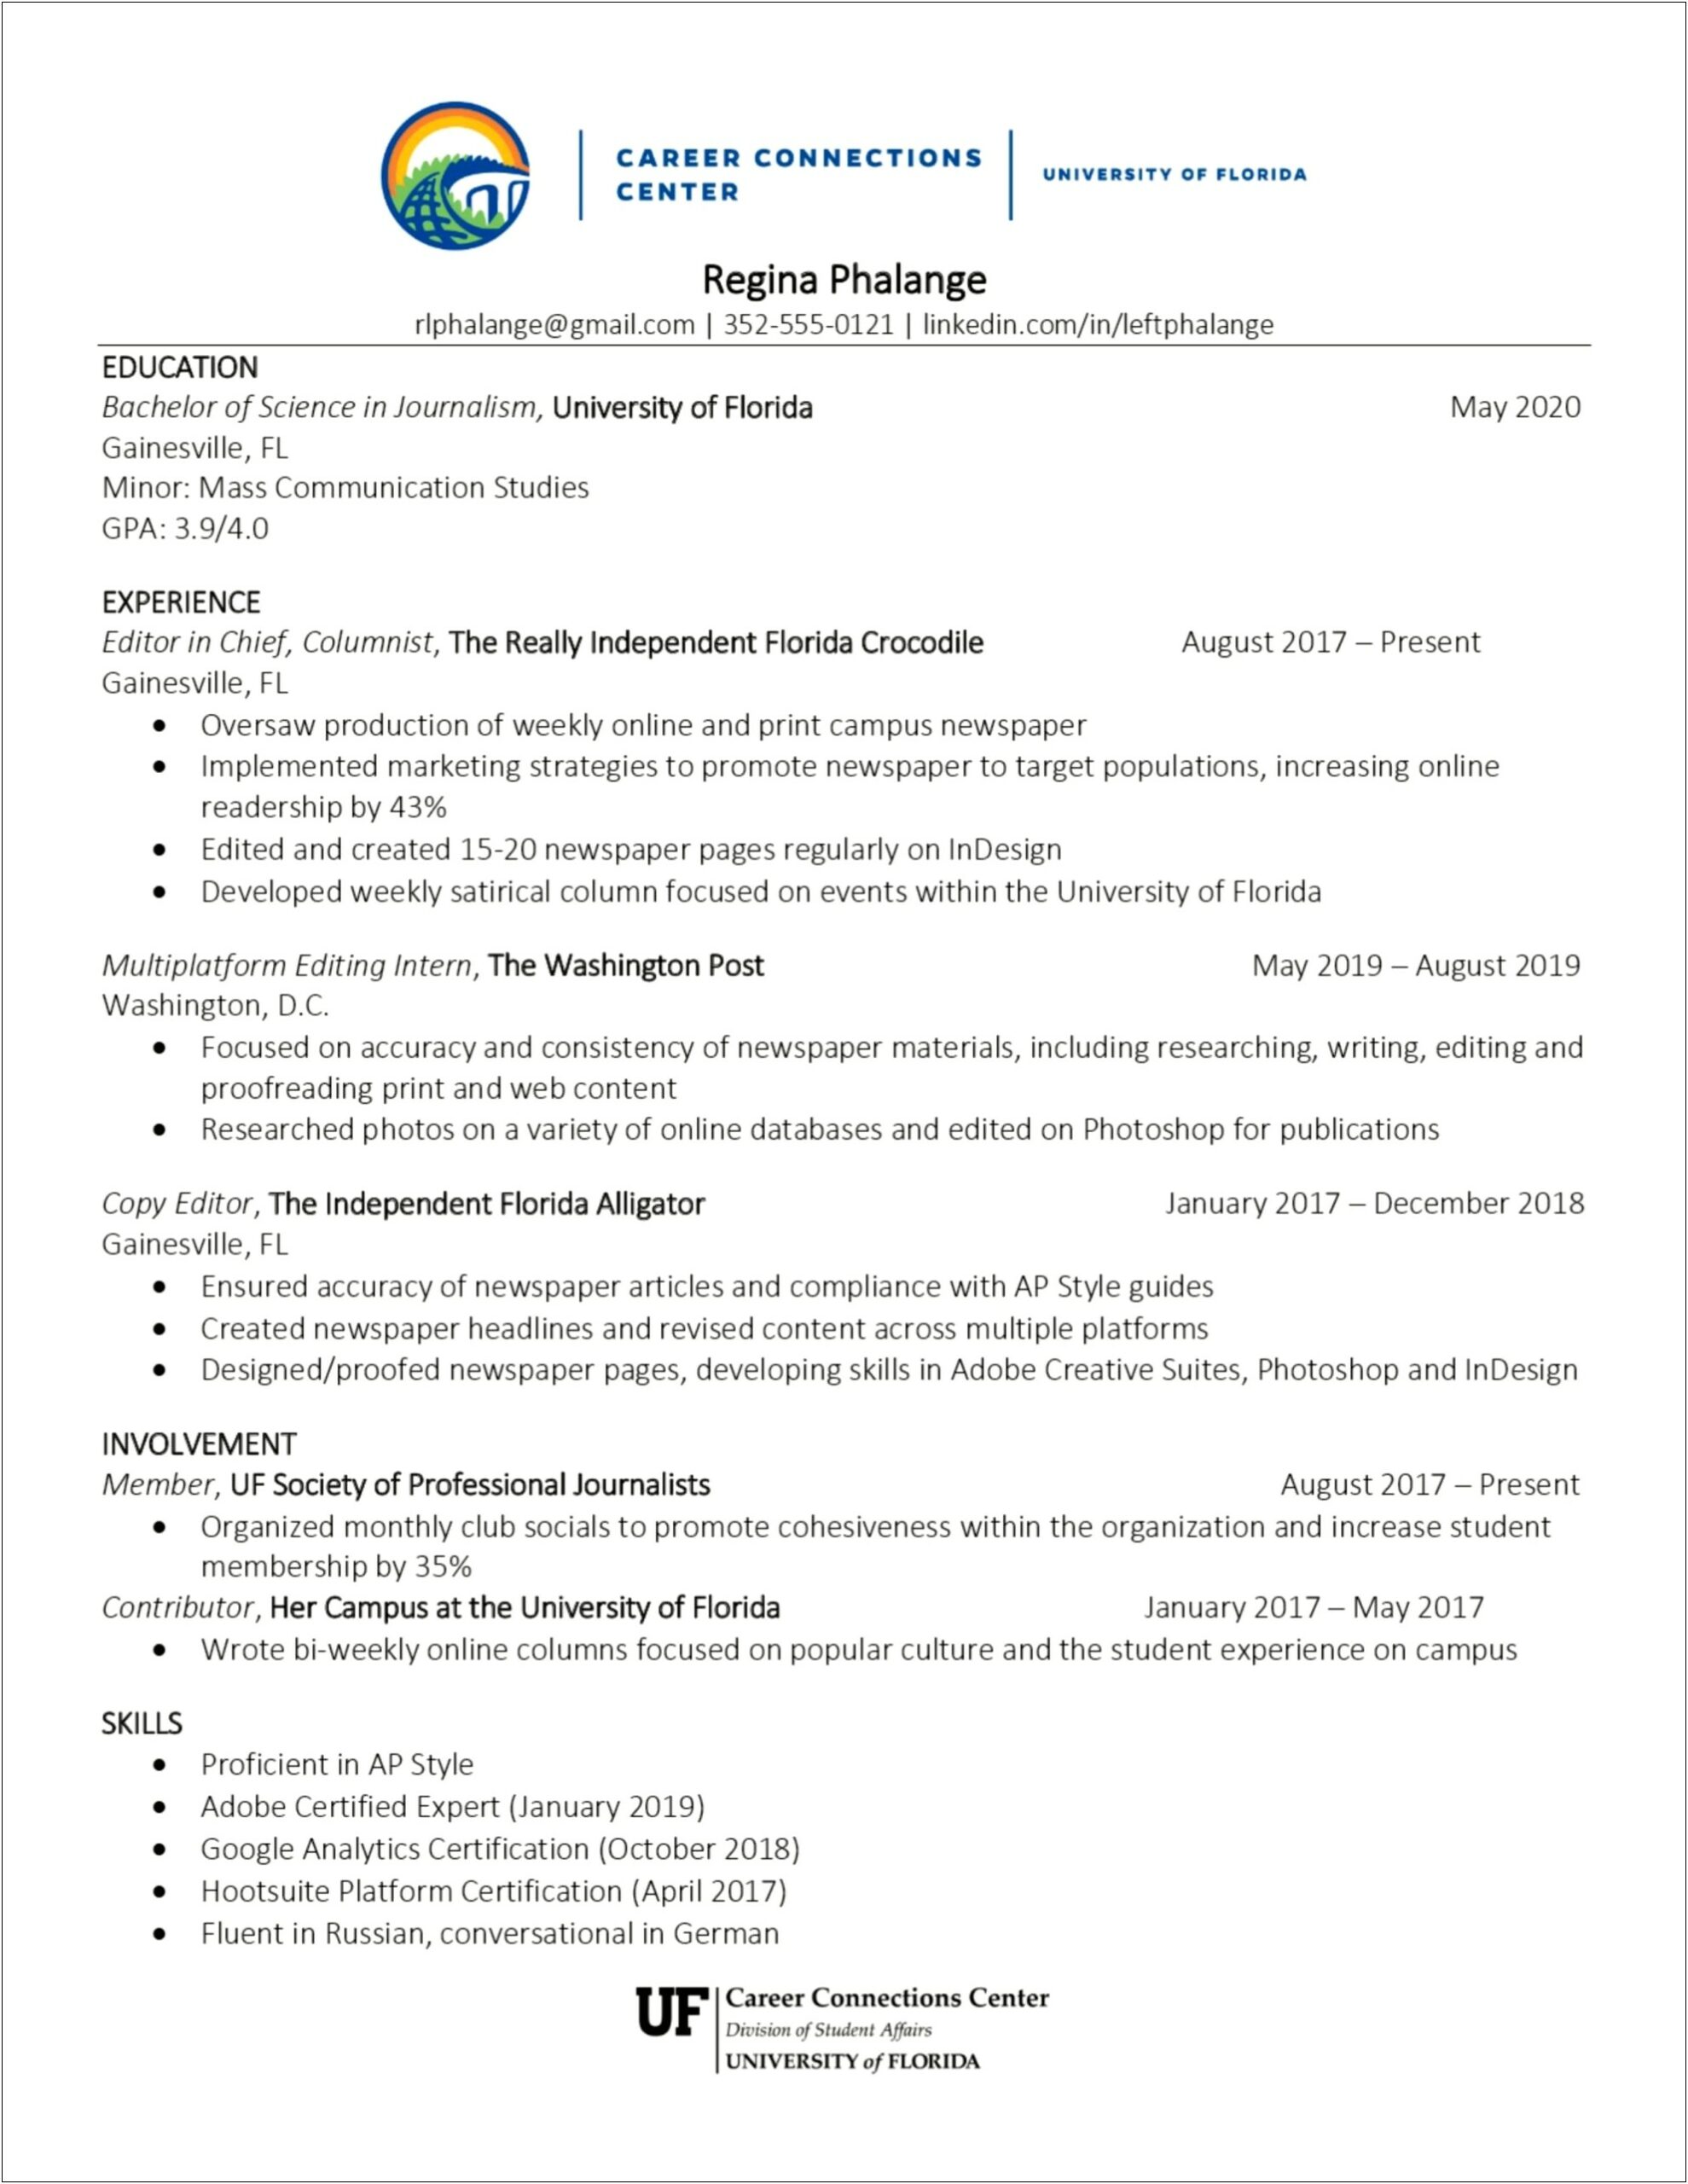 Resume Examples Foster Business School